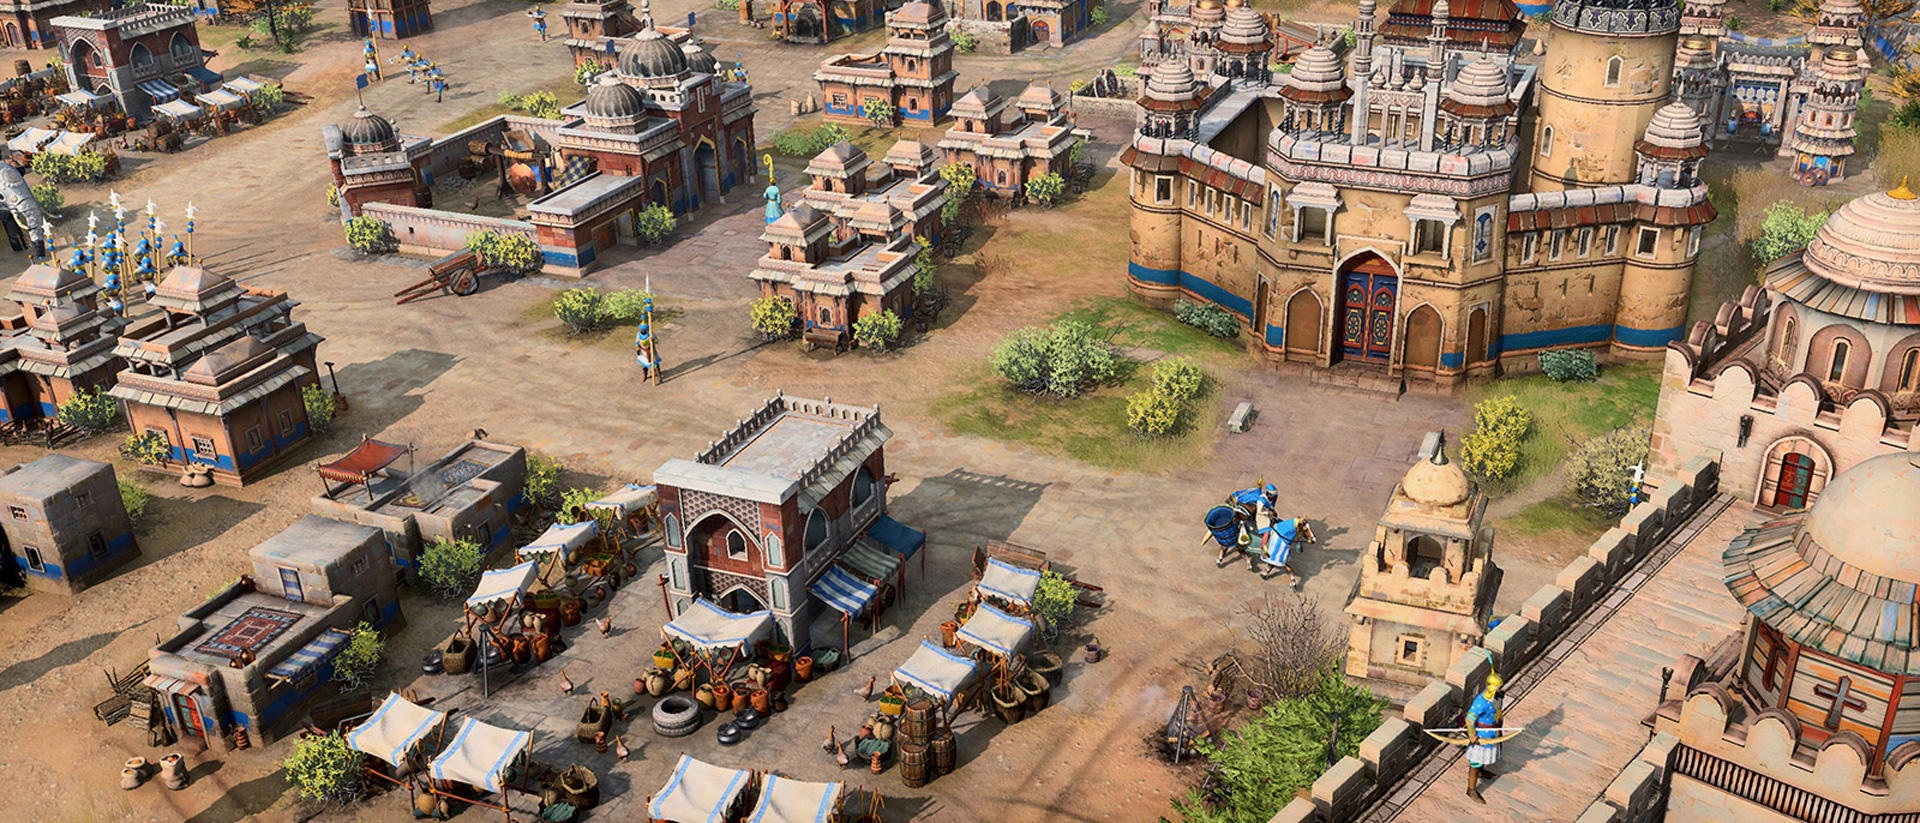 Age of Empires 4 is free this week!